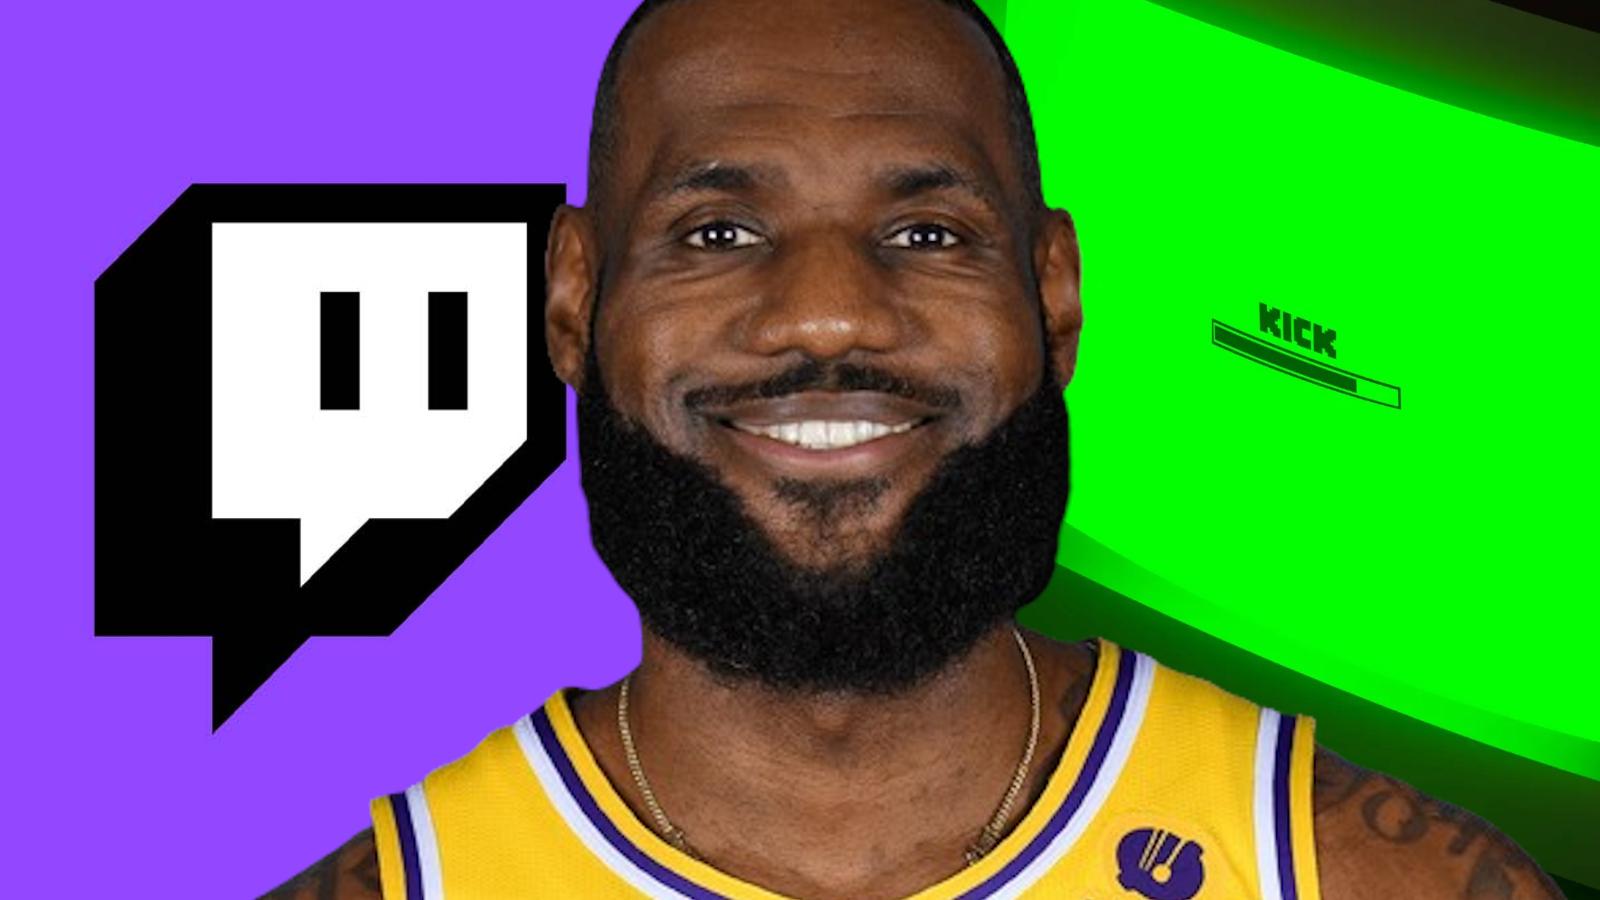 lebron james joining twitch or kick to stream